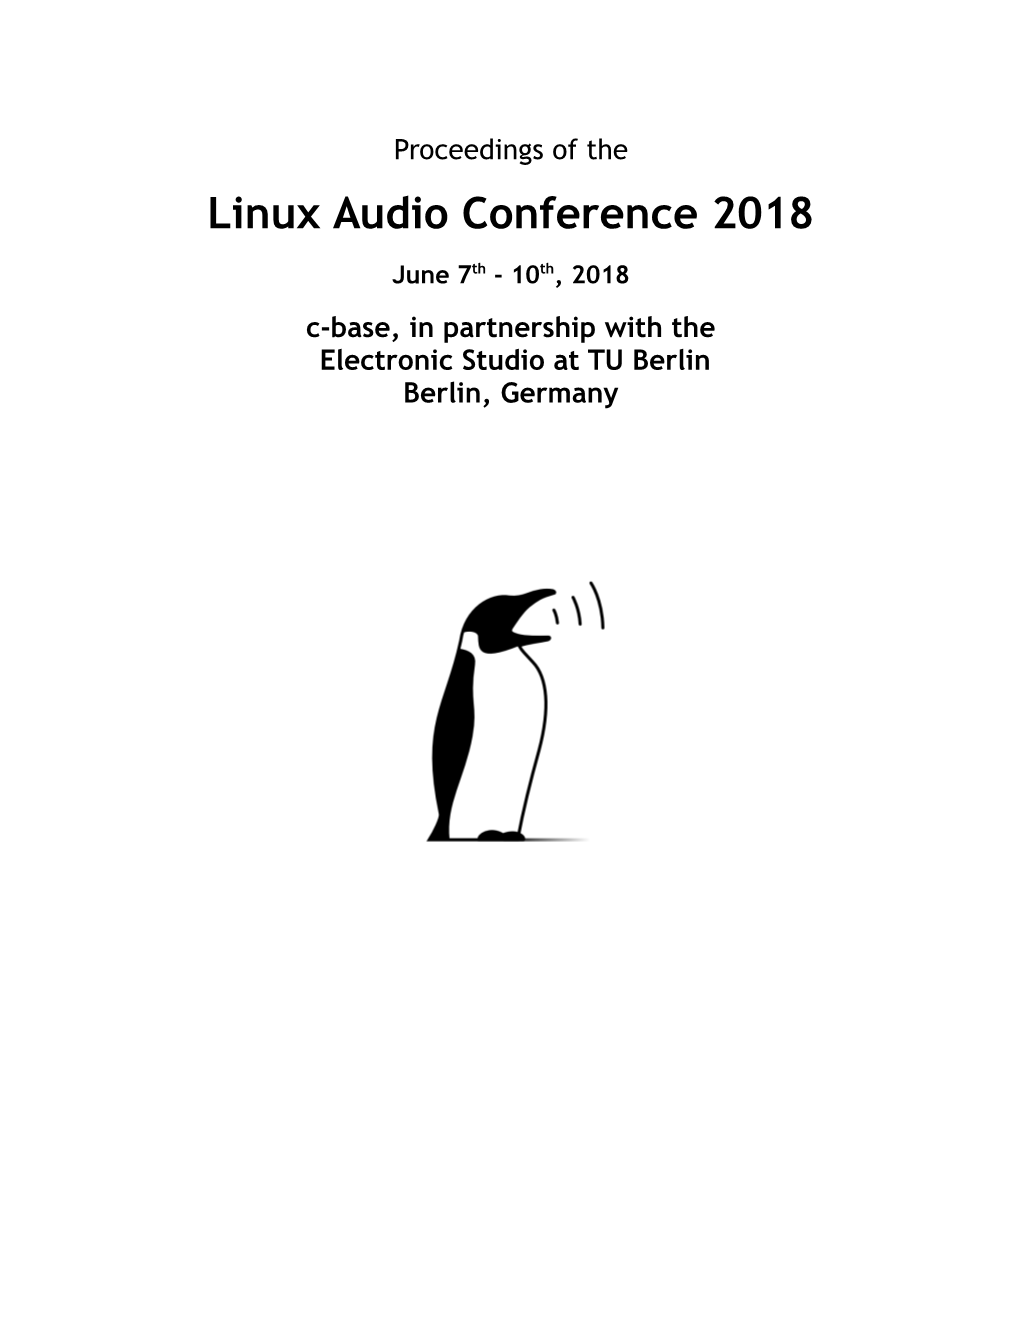 Proceedings Der Linux Audio Conference 2018